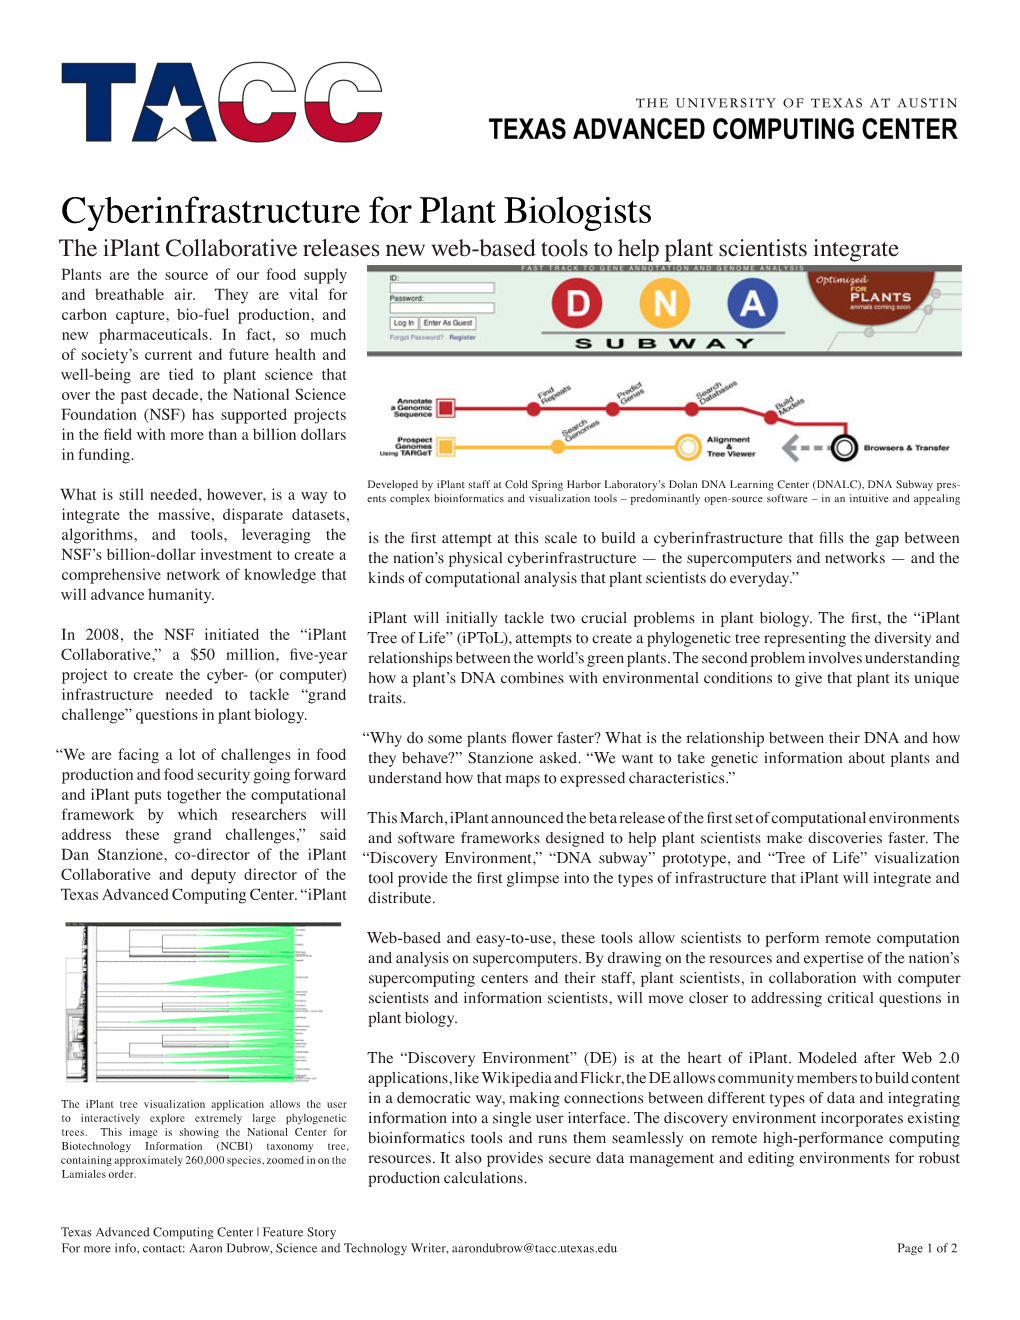 Cyberinfrastructure for Plant Biologists